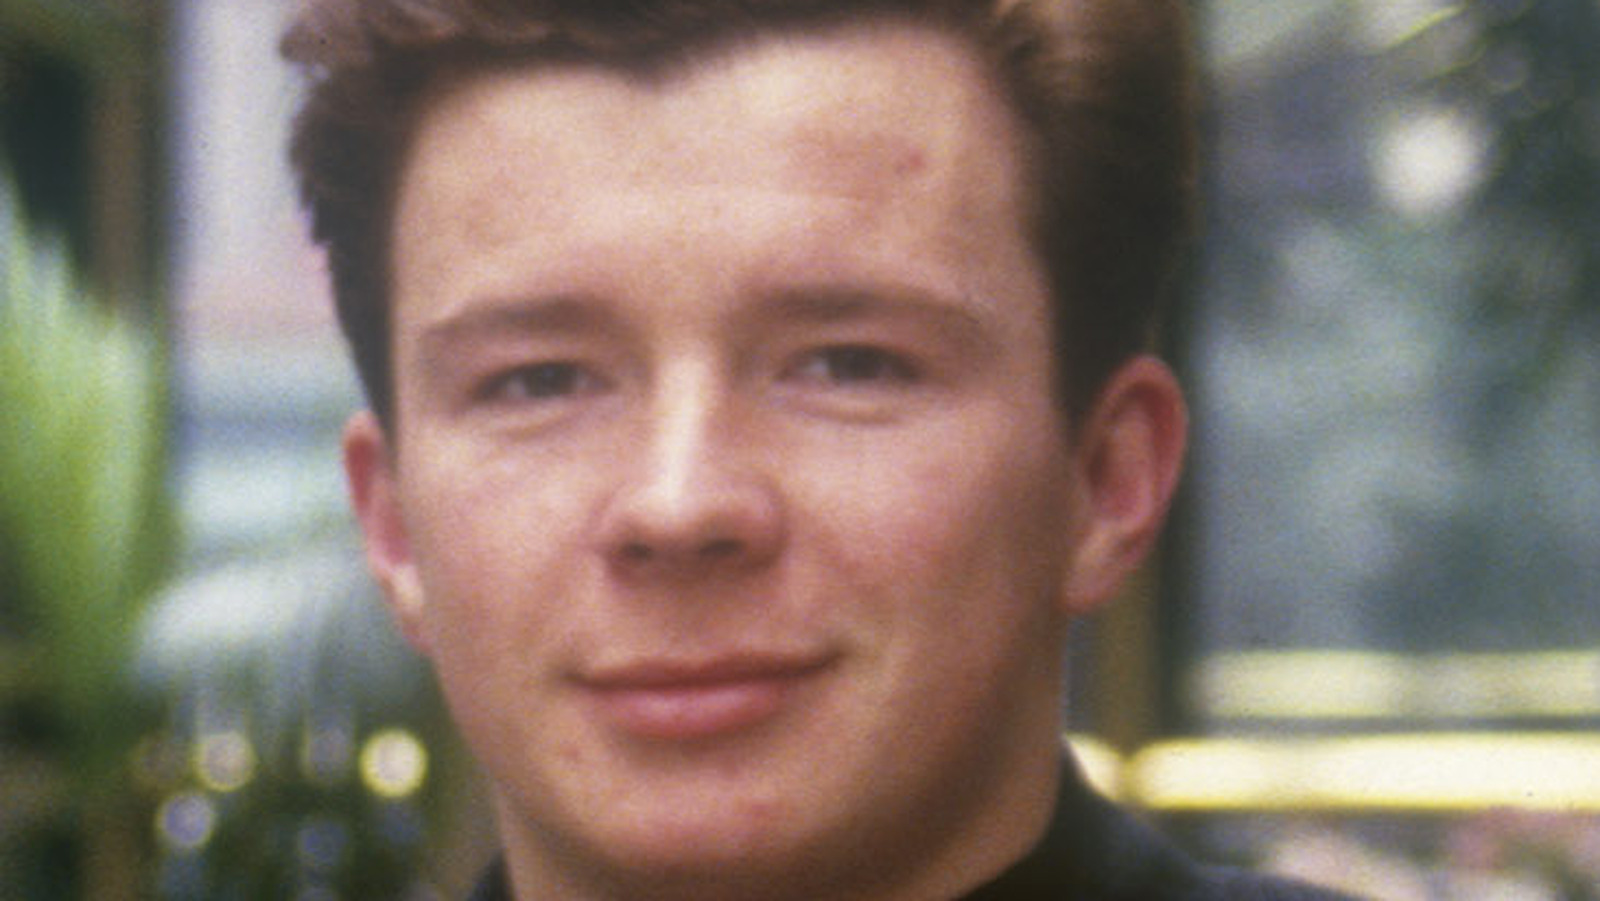 The History of RickRolling